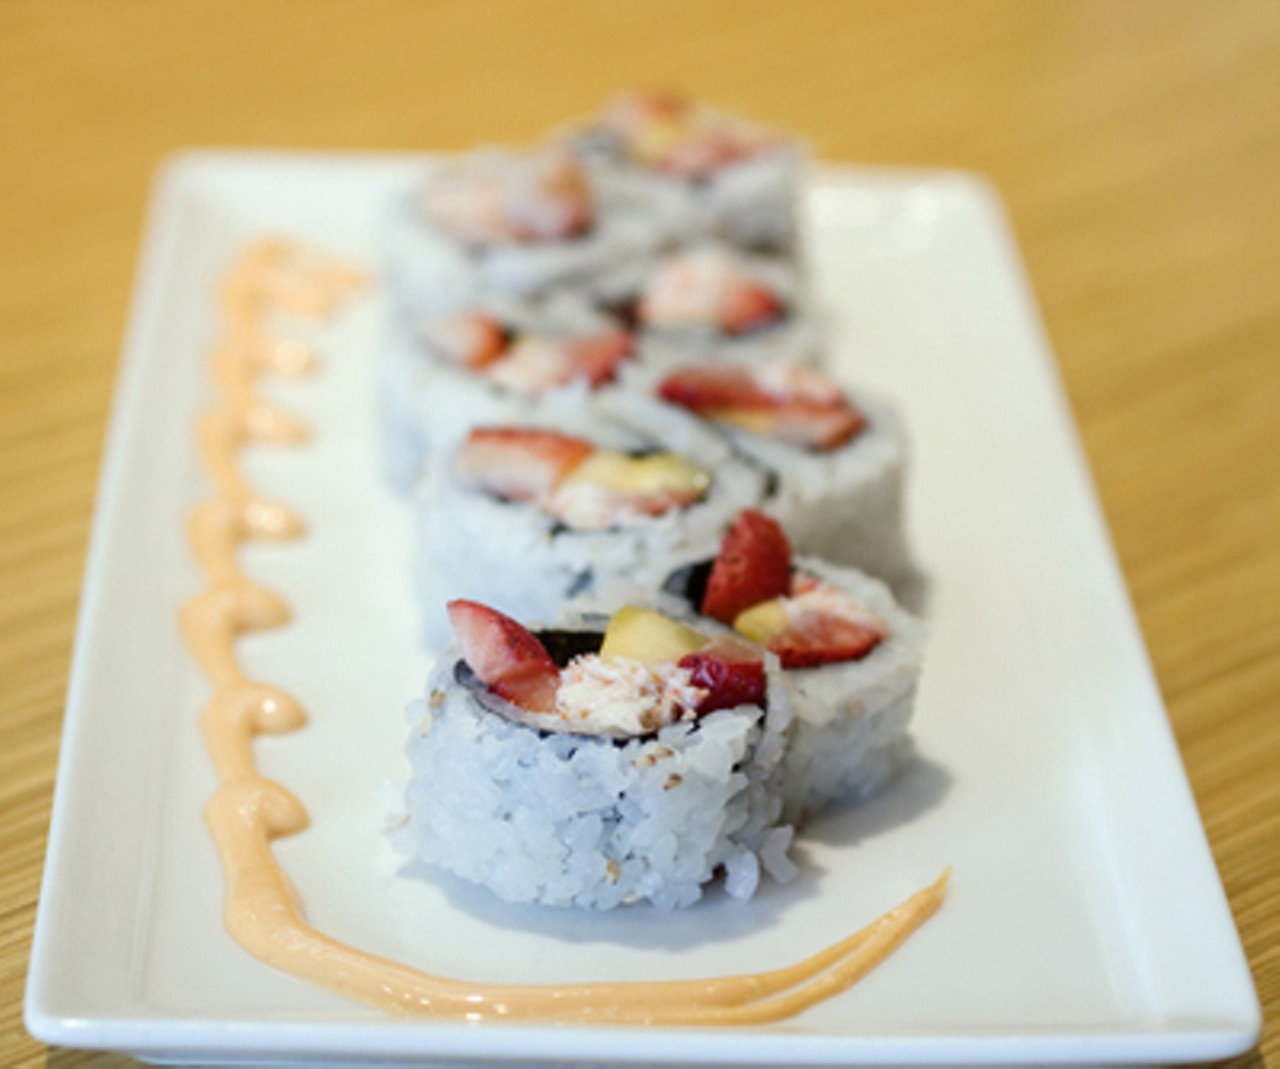 Read Ian Froeb's Review: "In Chesterfield, Momoyama's picks up where Yoshi's Sushi left off."